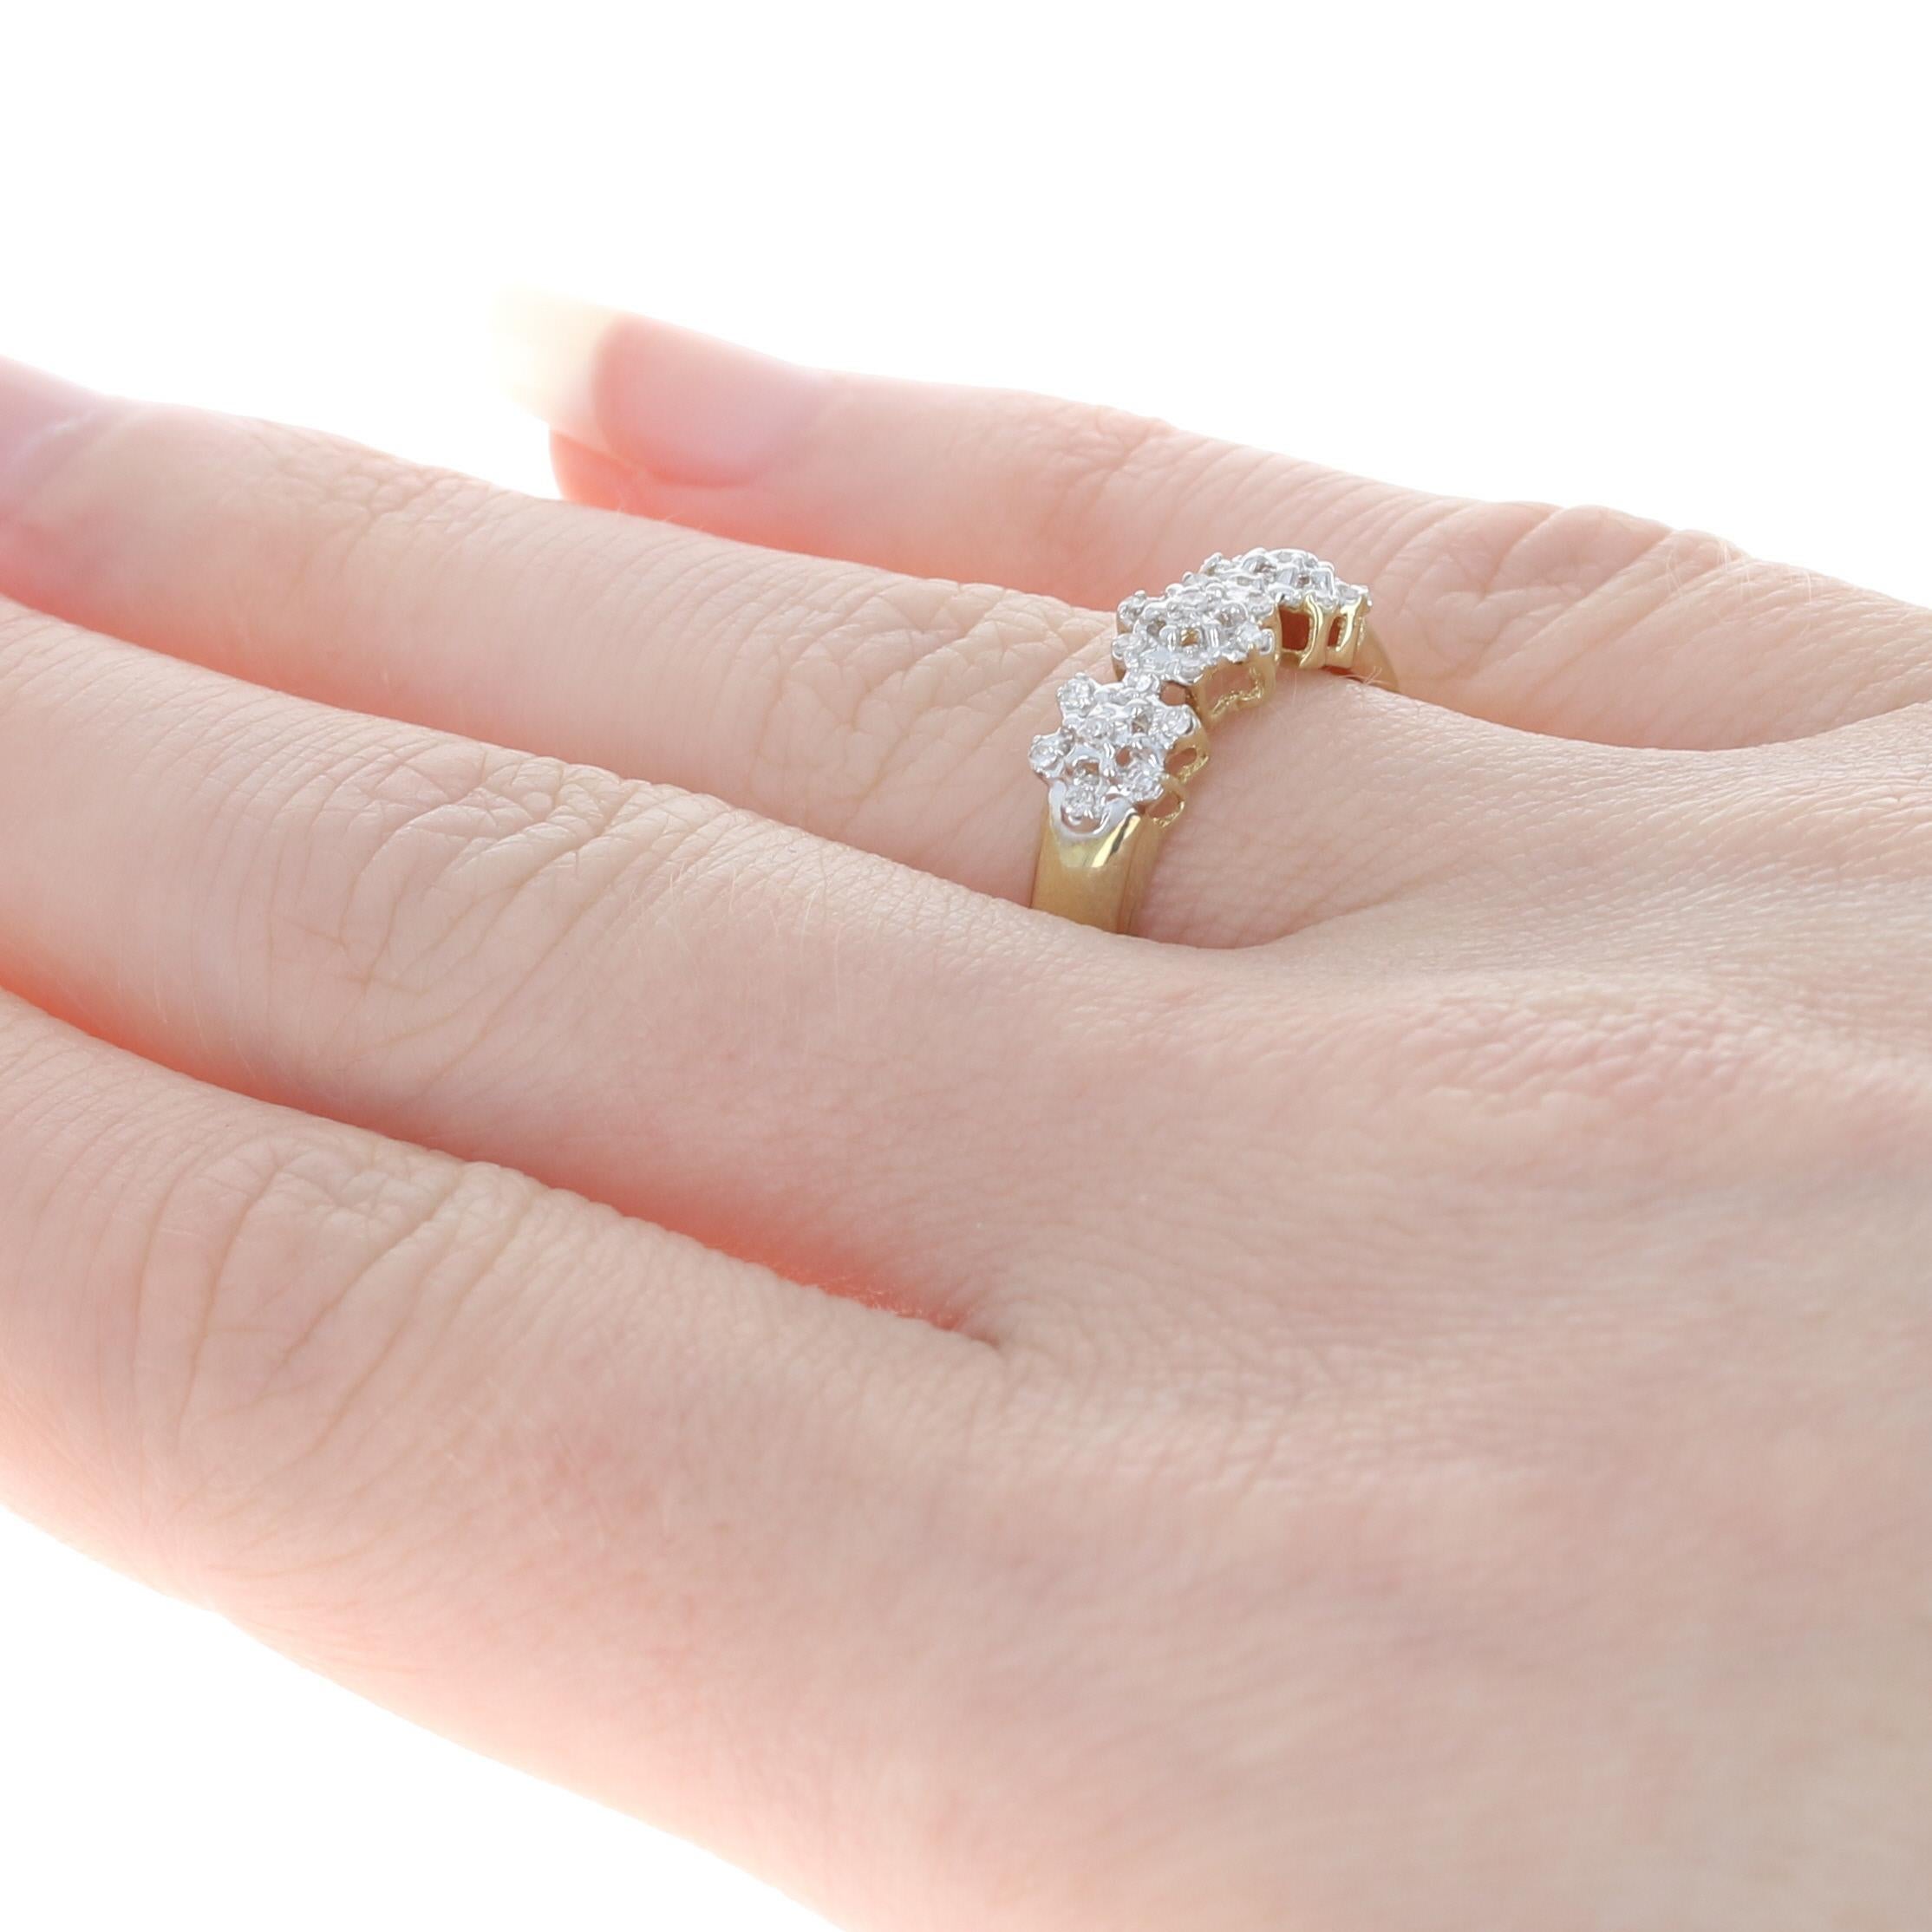 For Sale:  New Diamond Ring, 10k Gold Flowers Snowflakes Single Cut .20ctw 4